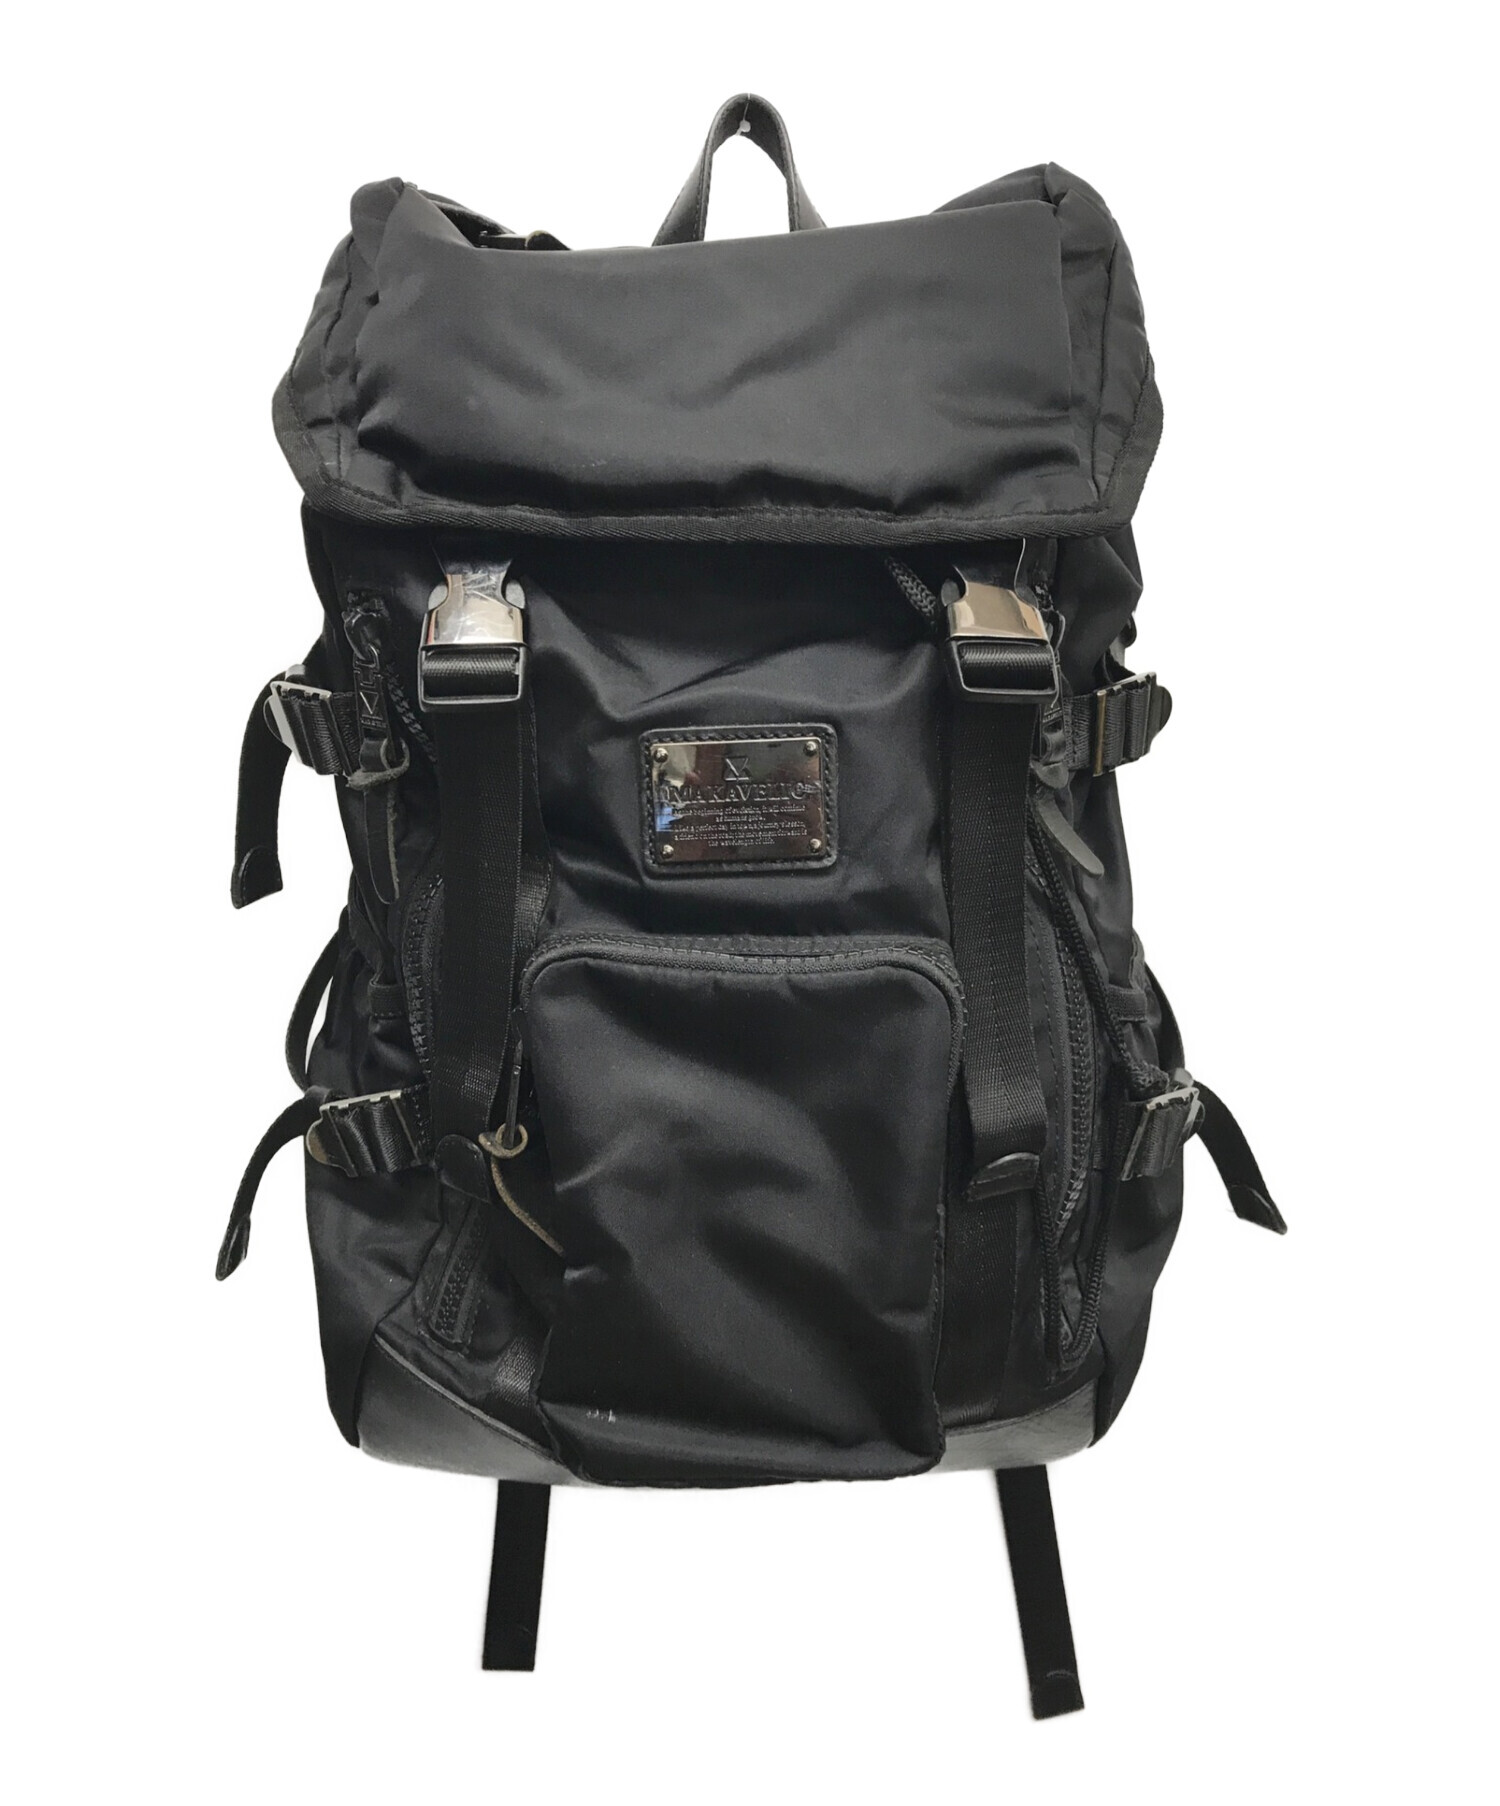 MAKAVELIC (マキャベリック) バックパック / SIERRA SUPERIORITY TIMON BACKPACK